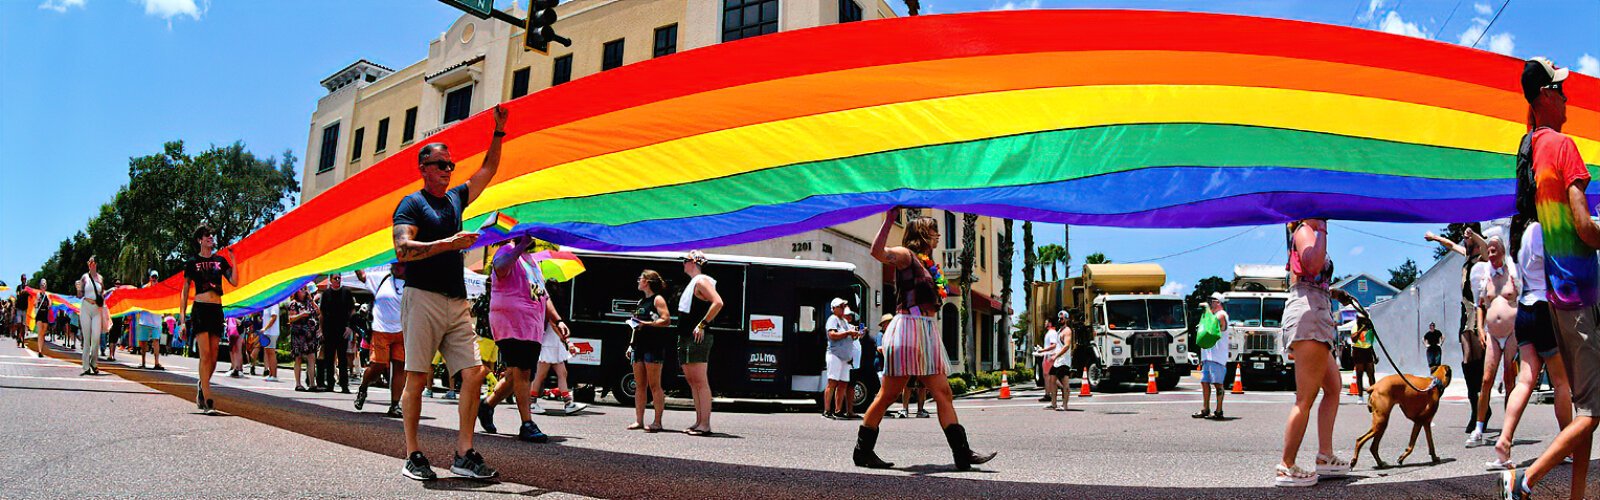 A symbol of LGBTQ pride, a gigantic Pride banner is carried down Central Avenue during the St Pete Pride’s street festival on Sunday June 25th.